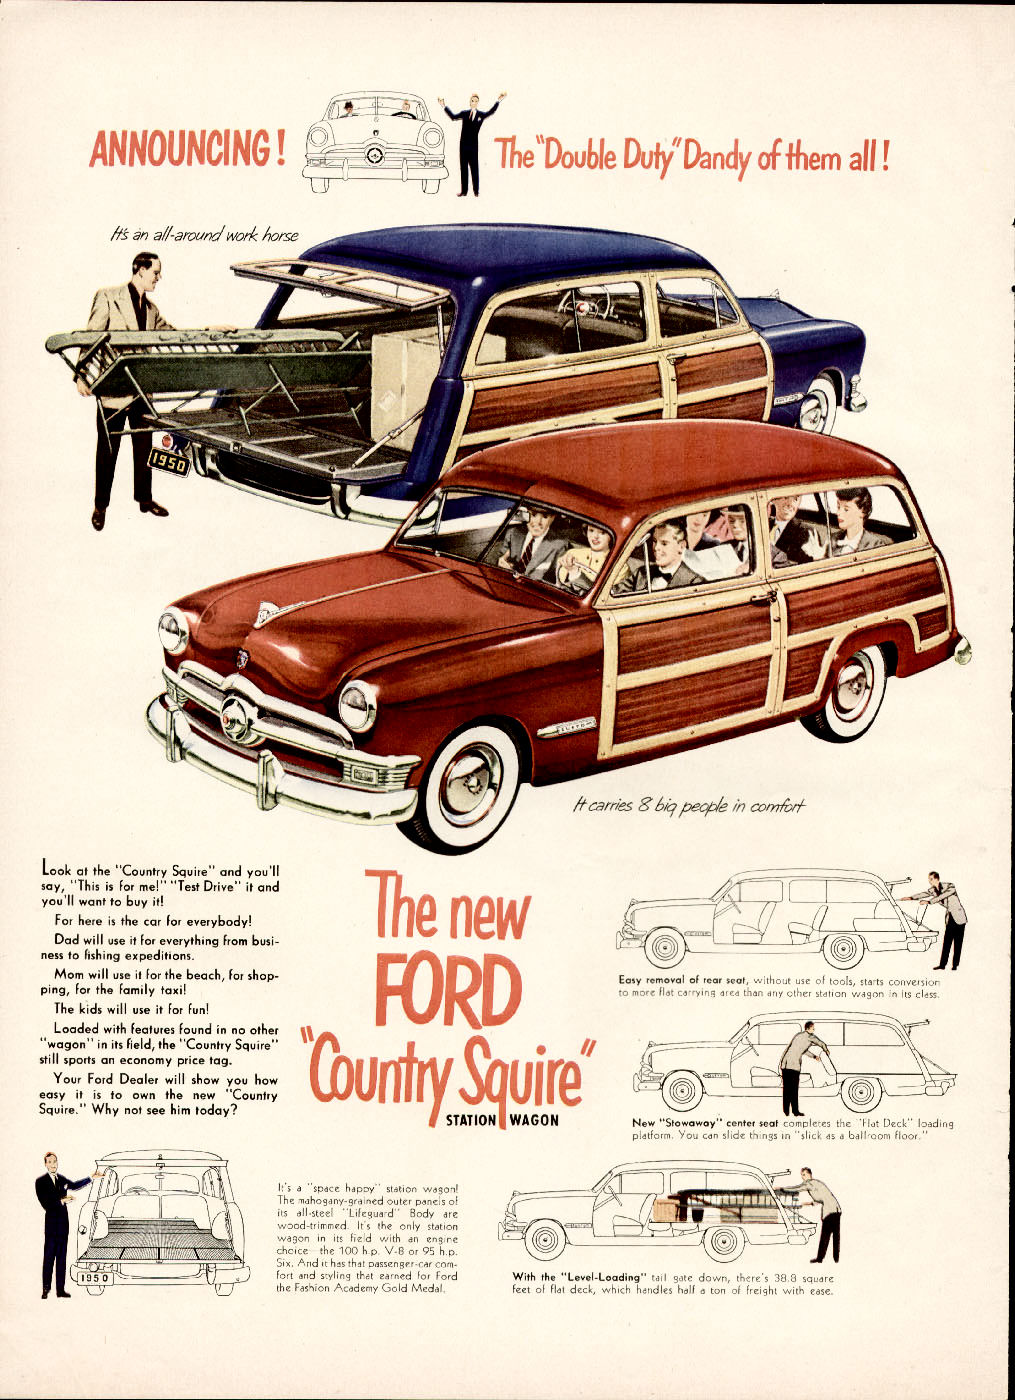 Ford advertising 1950 #10